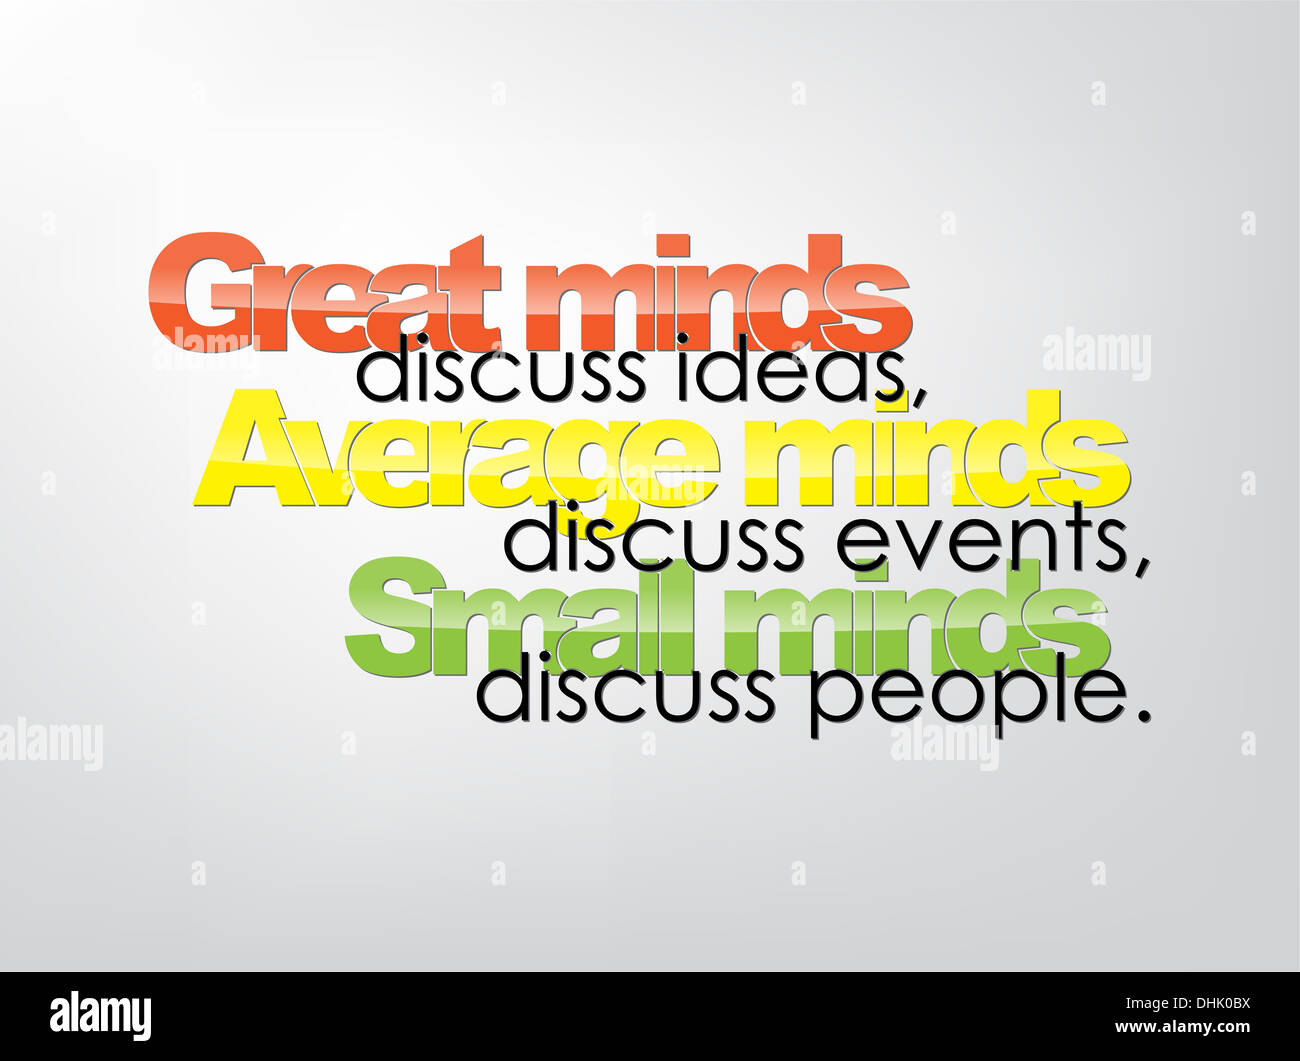 Great minds discuss ideas, Average minds discuss events, Small minds discuss people. Motivational background. Typography poster. Stock Photo